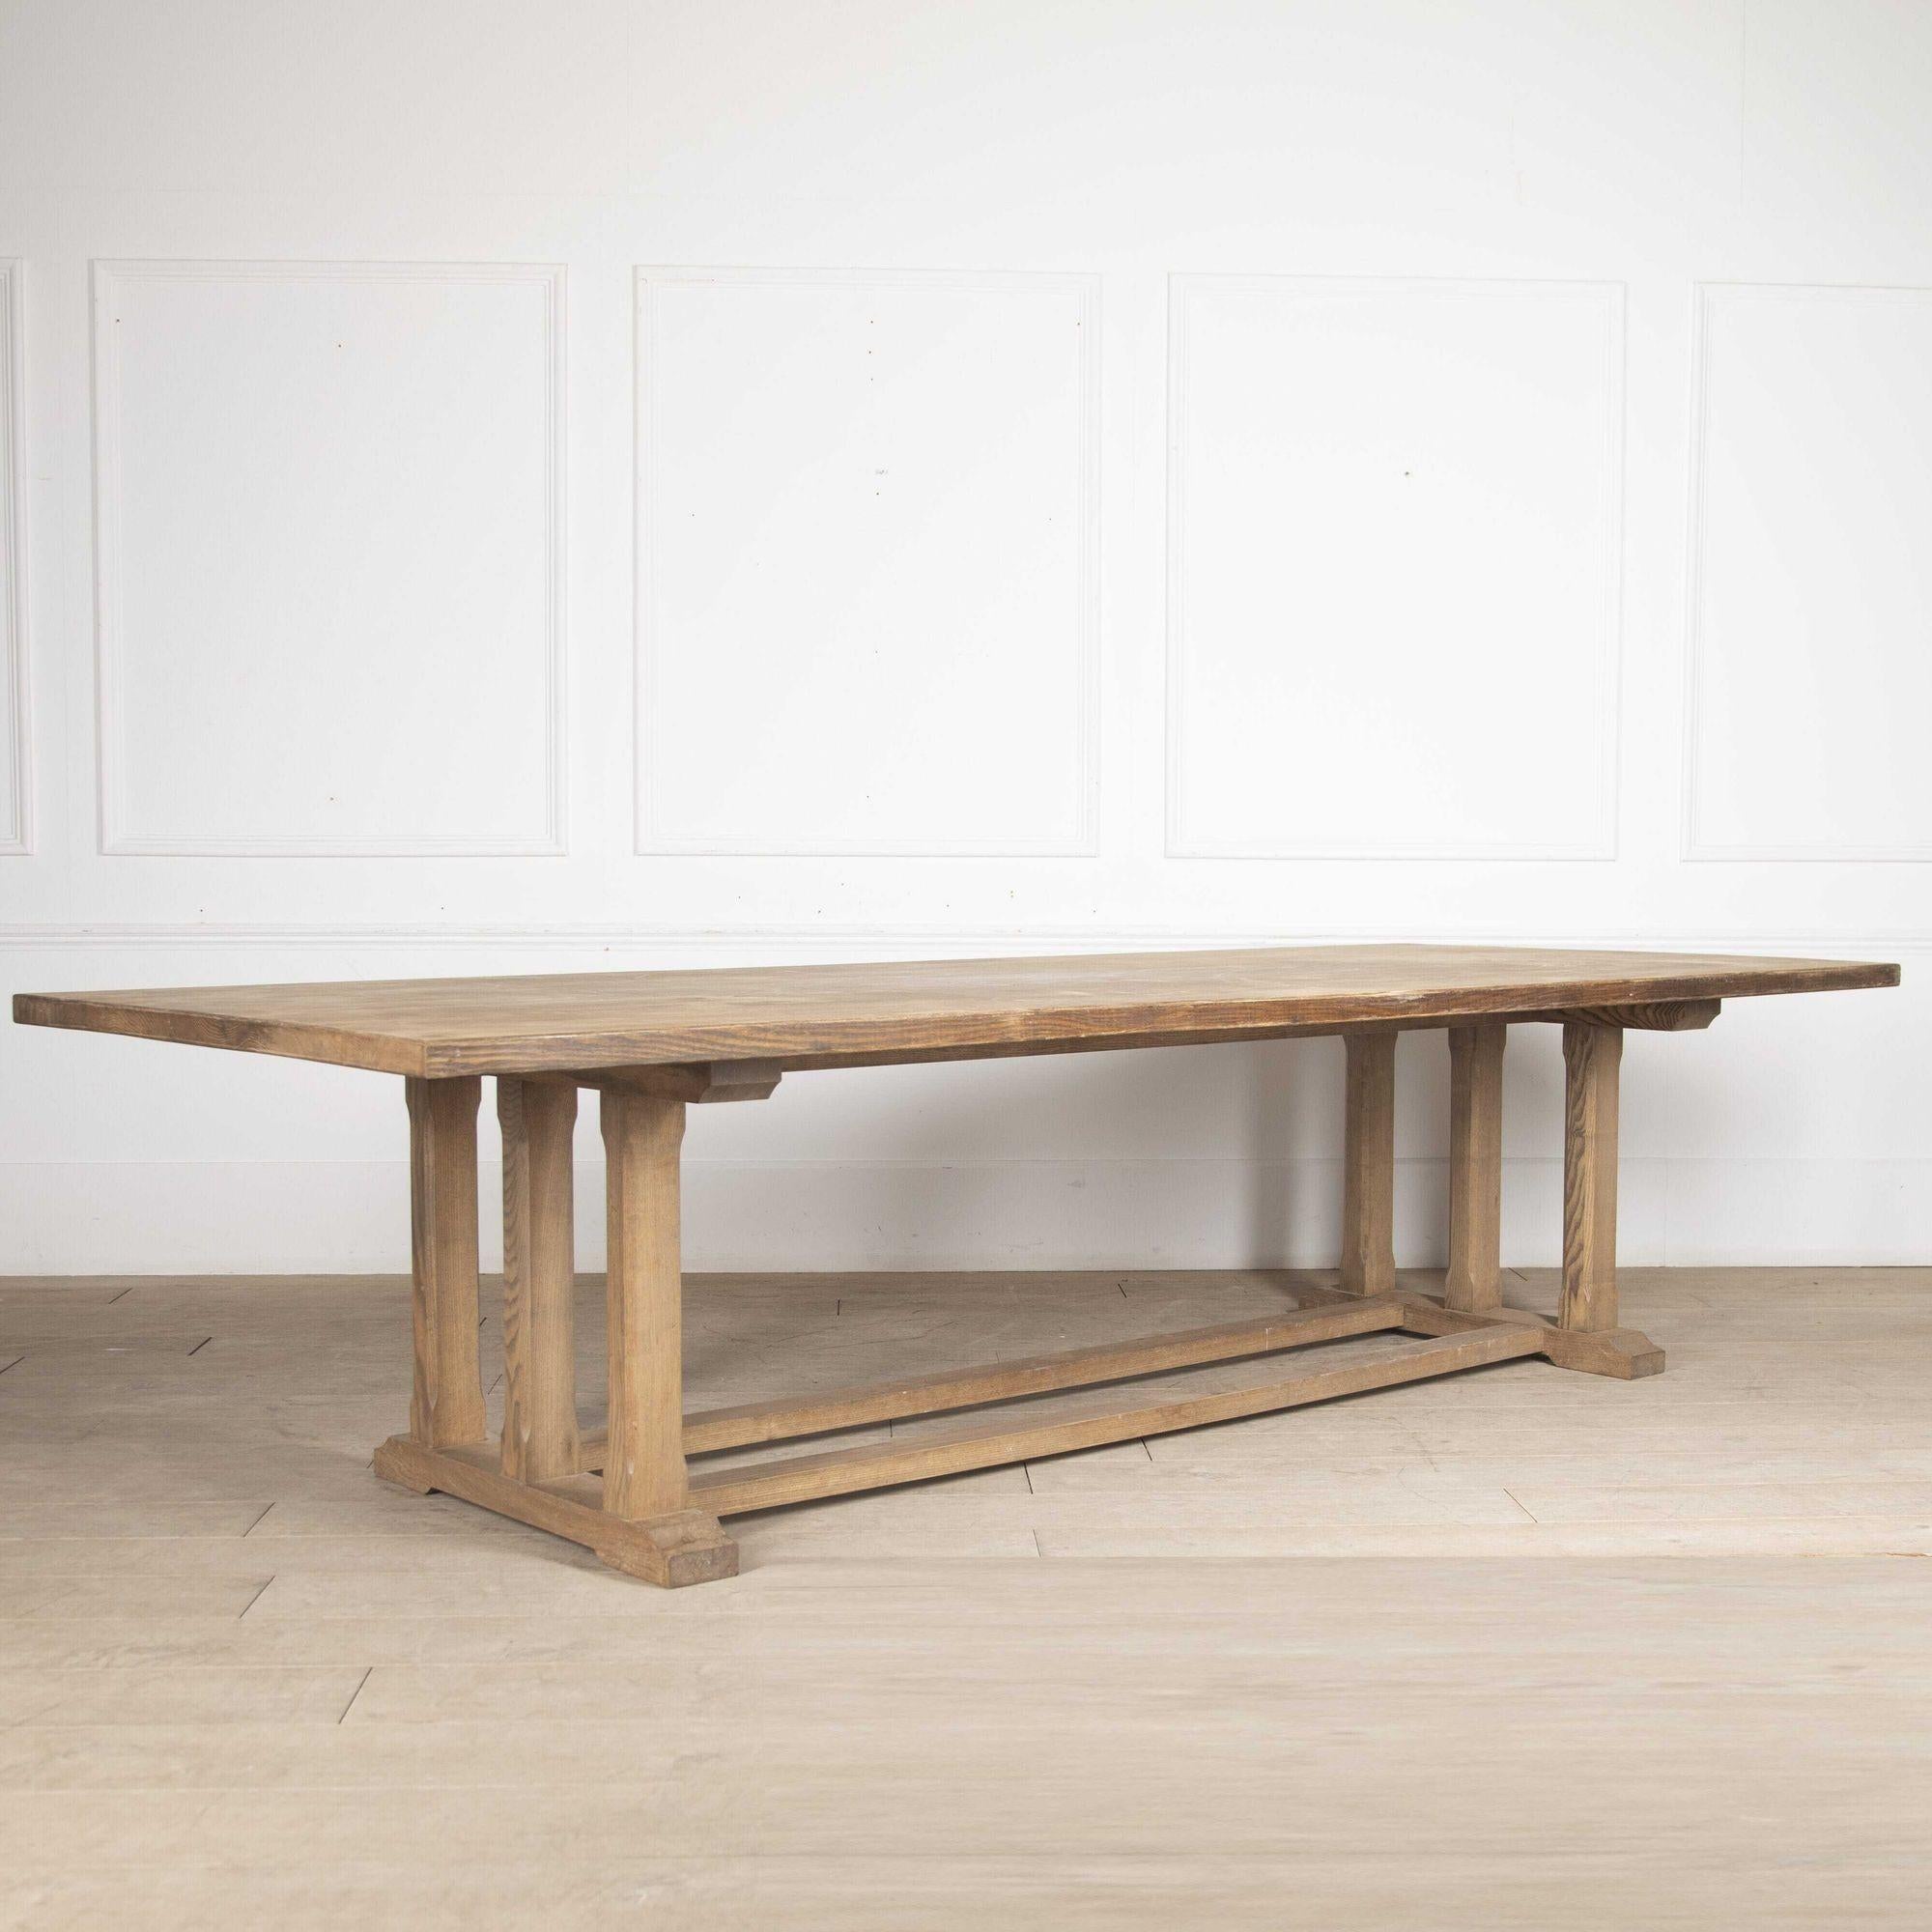 Large Arts and Crafts English Oak Refectory Table 1